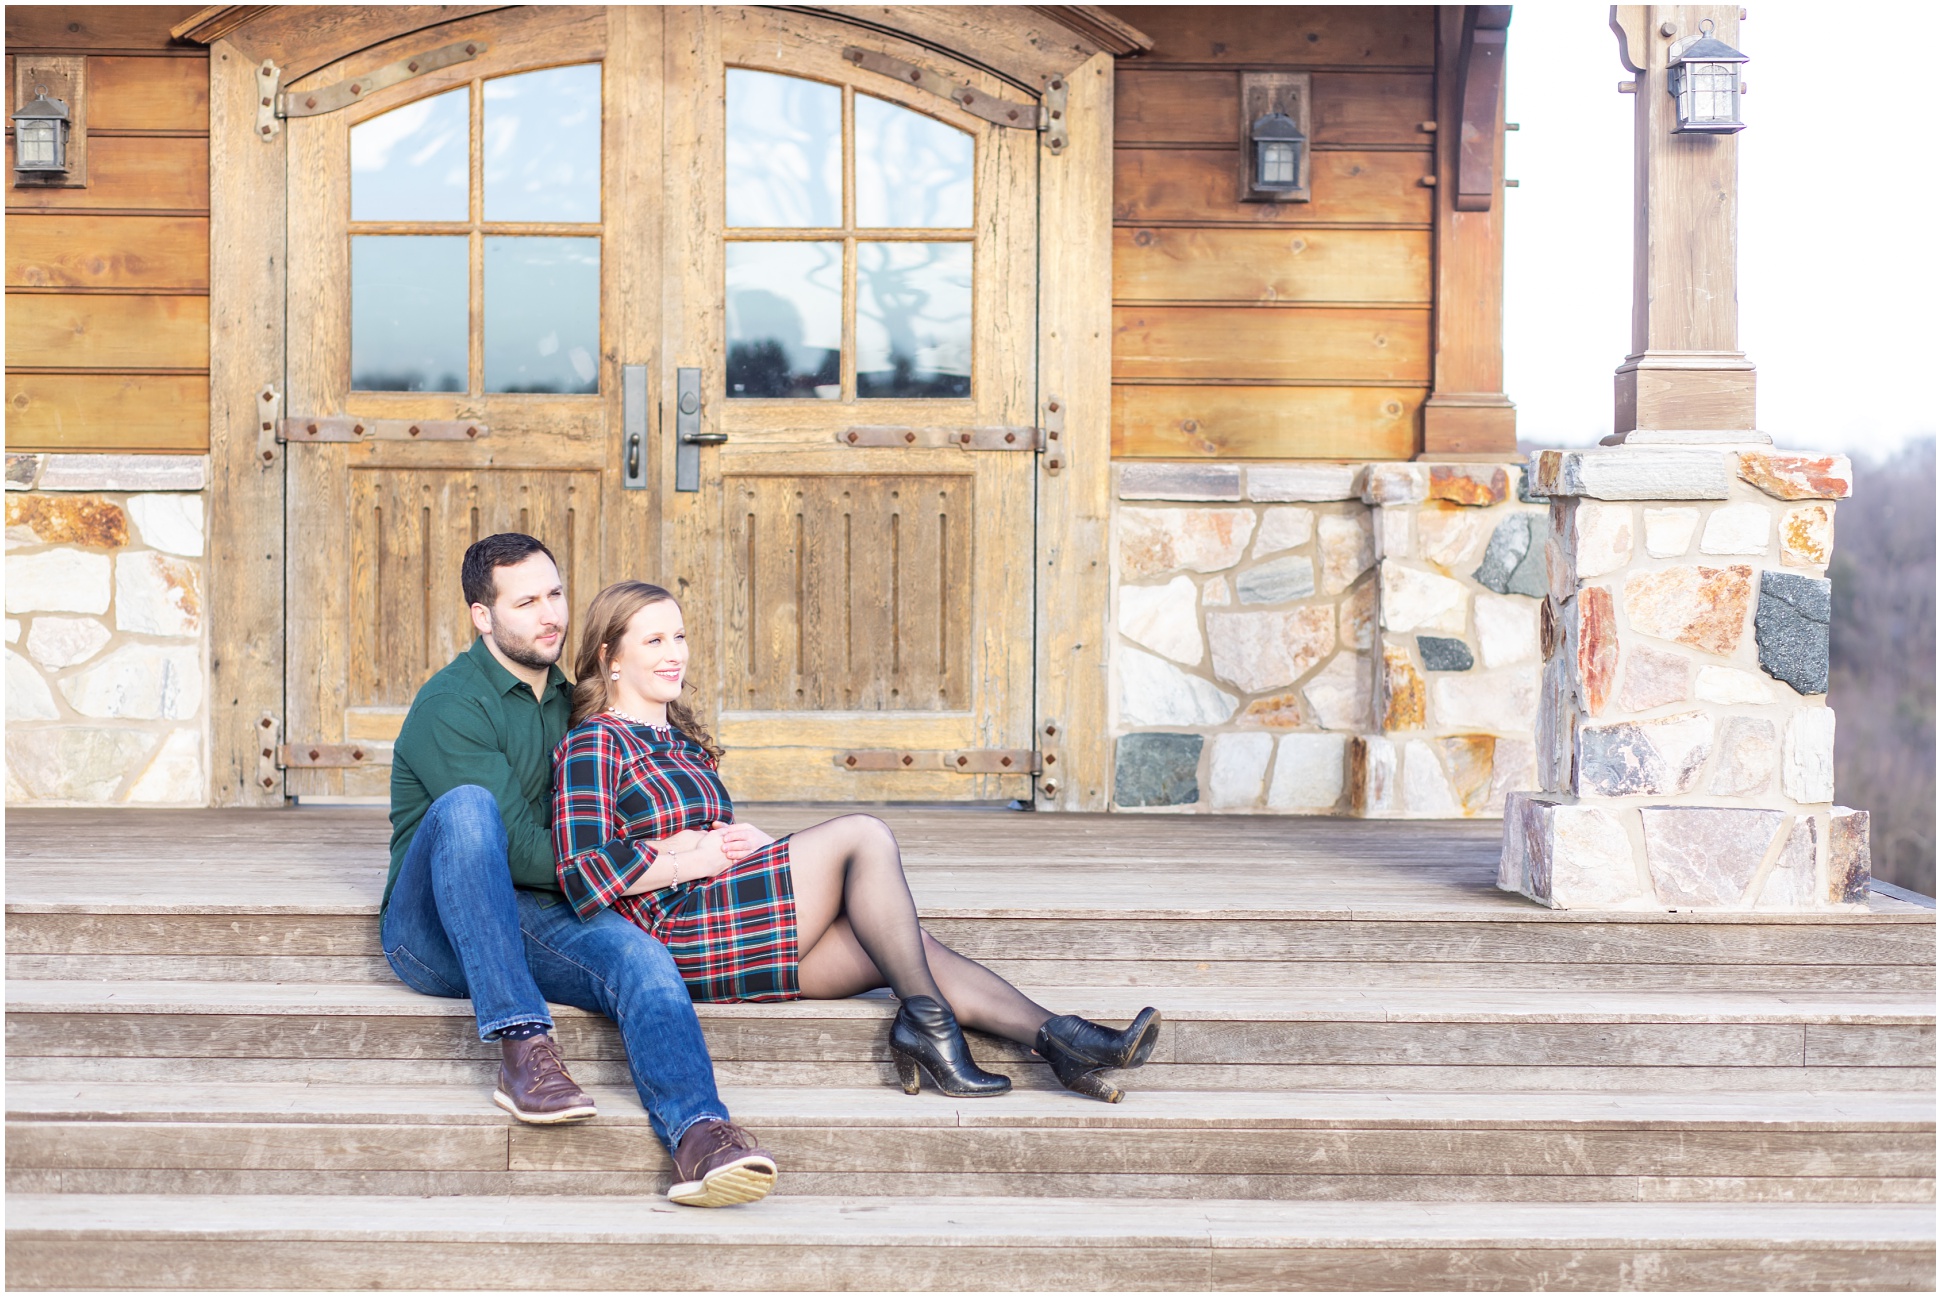 groom wearing jeans and a winter green button down shirt, bride wearing plaid dress and black booties